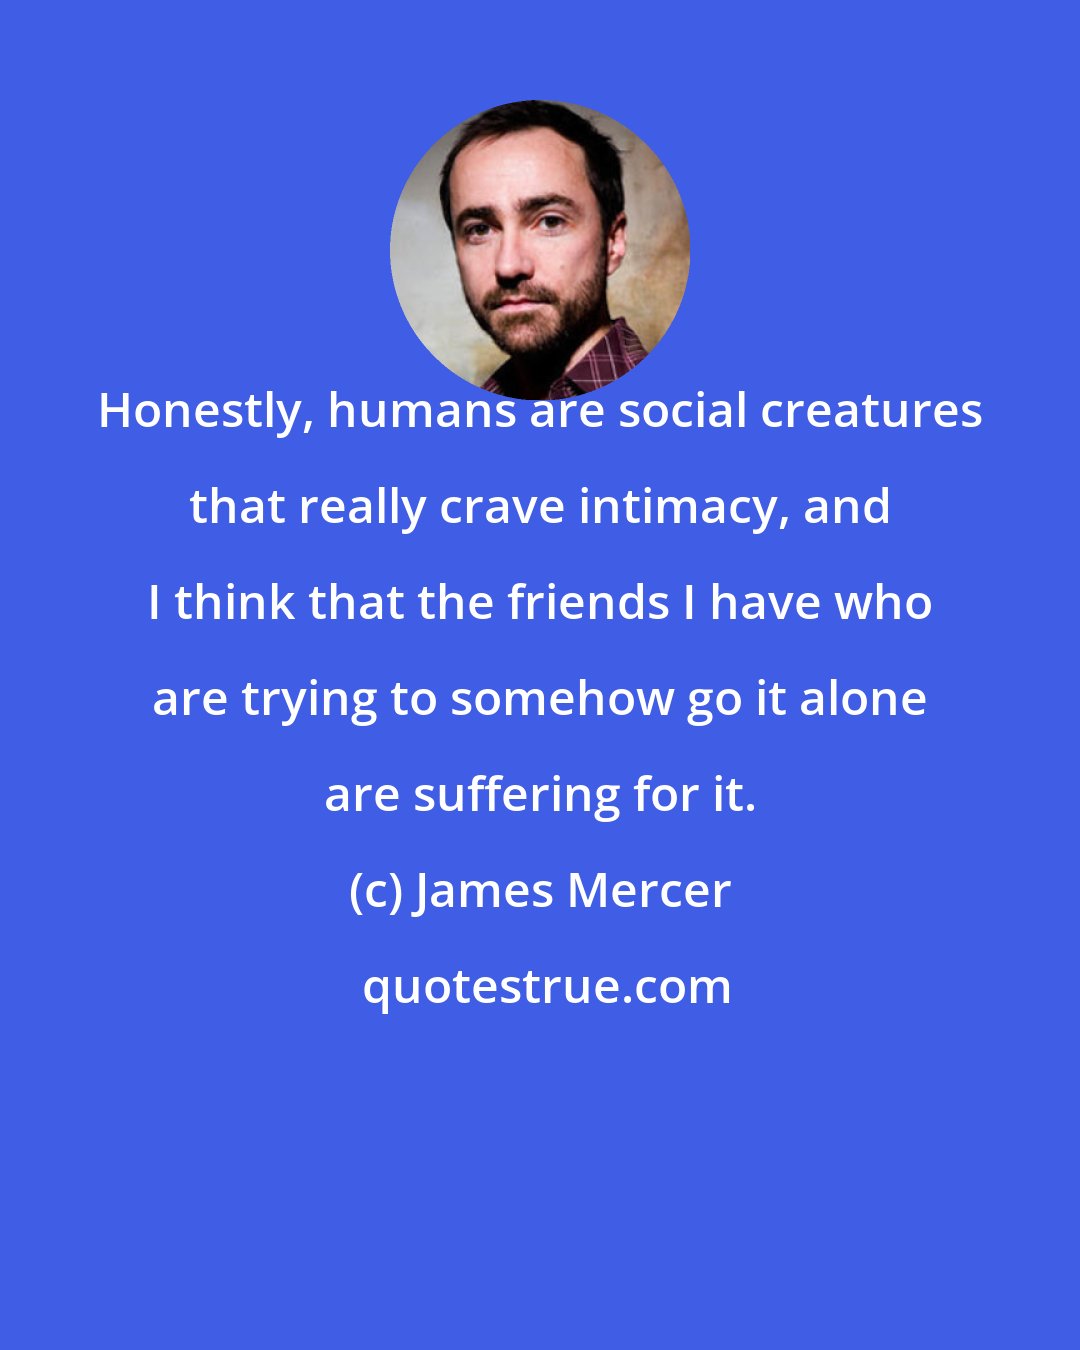 James Mercer: Honestly, humans are social creatures that really crave intimacy, and I think that the friends I have who are trying to somehow go it alone are suffering for it.